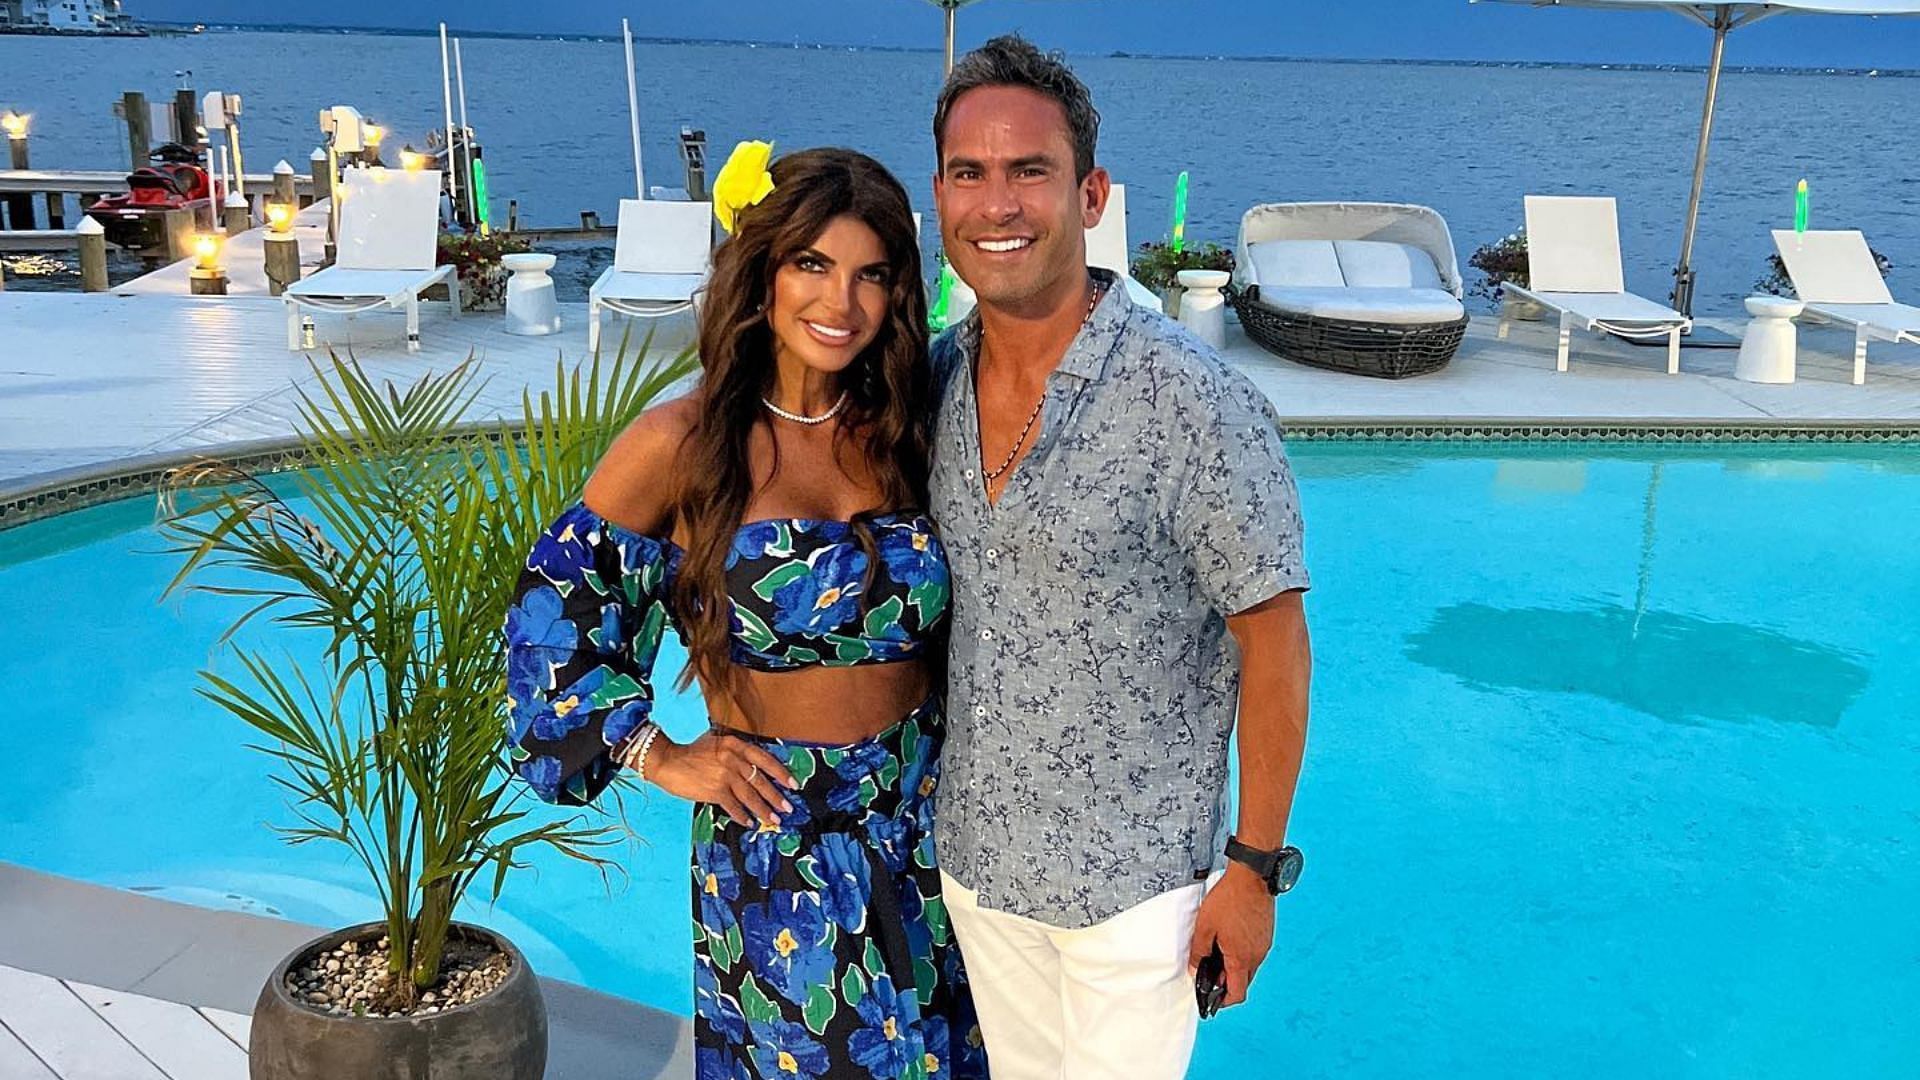 Real Housewives' star Teresa Giudice and Luis Ruelas got married